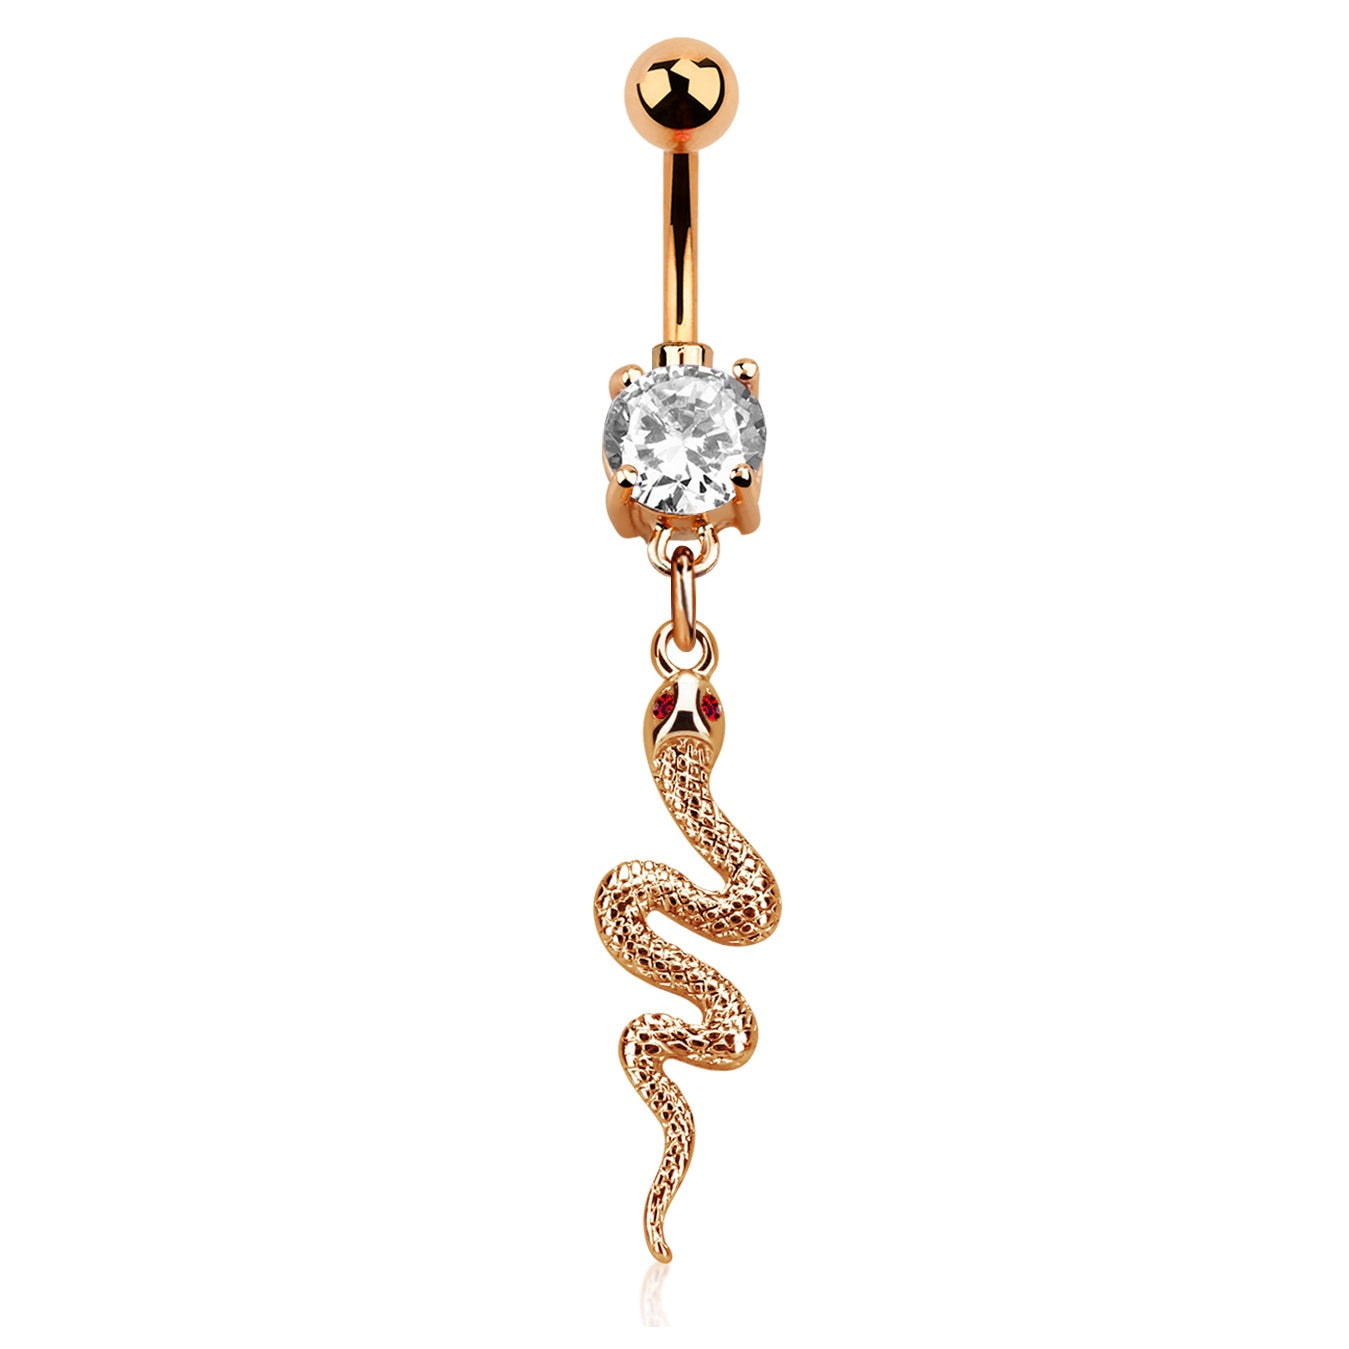 CZ Crystal Snake Dangling Belly Button Ring - Rose Gold Plated 316L Stainless Steel